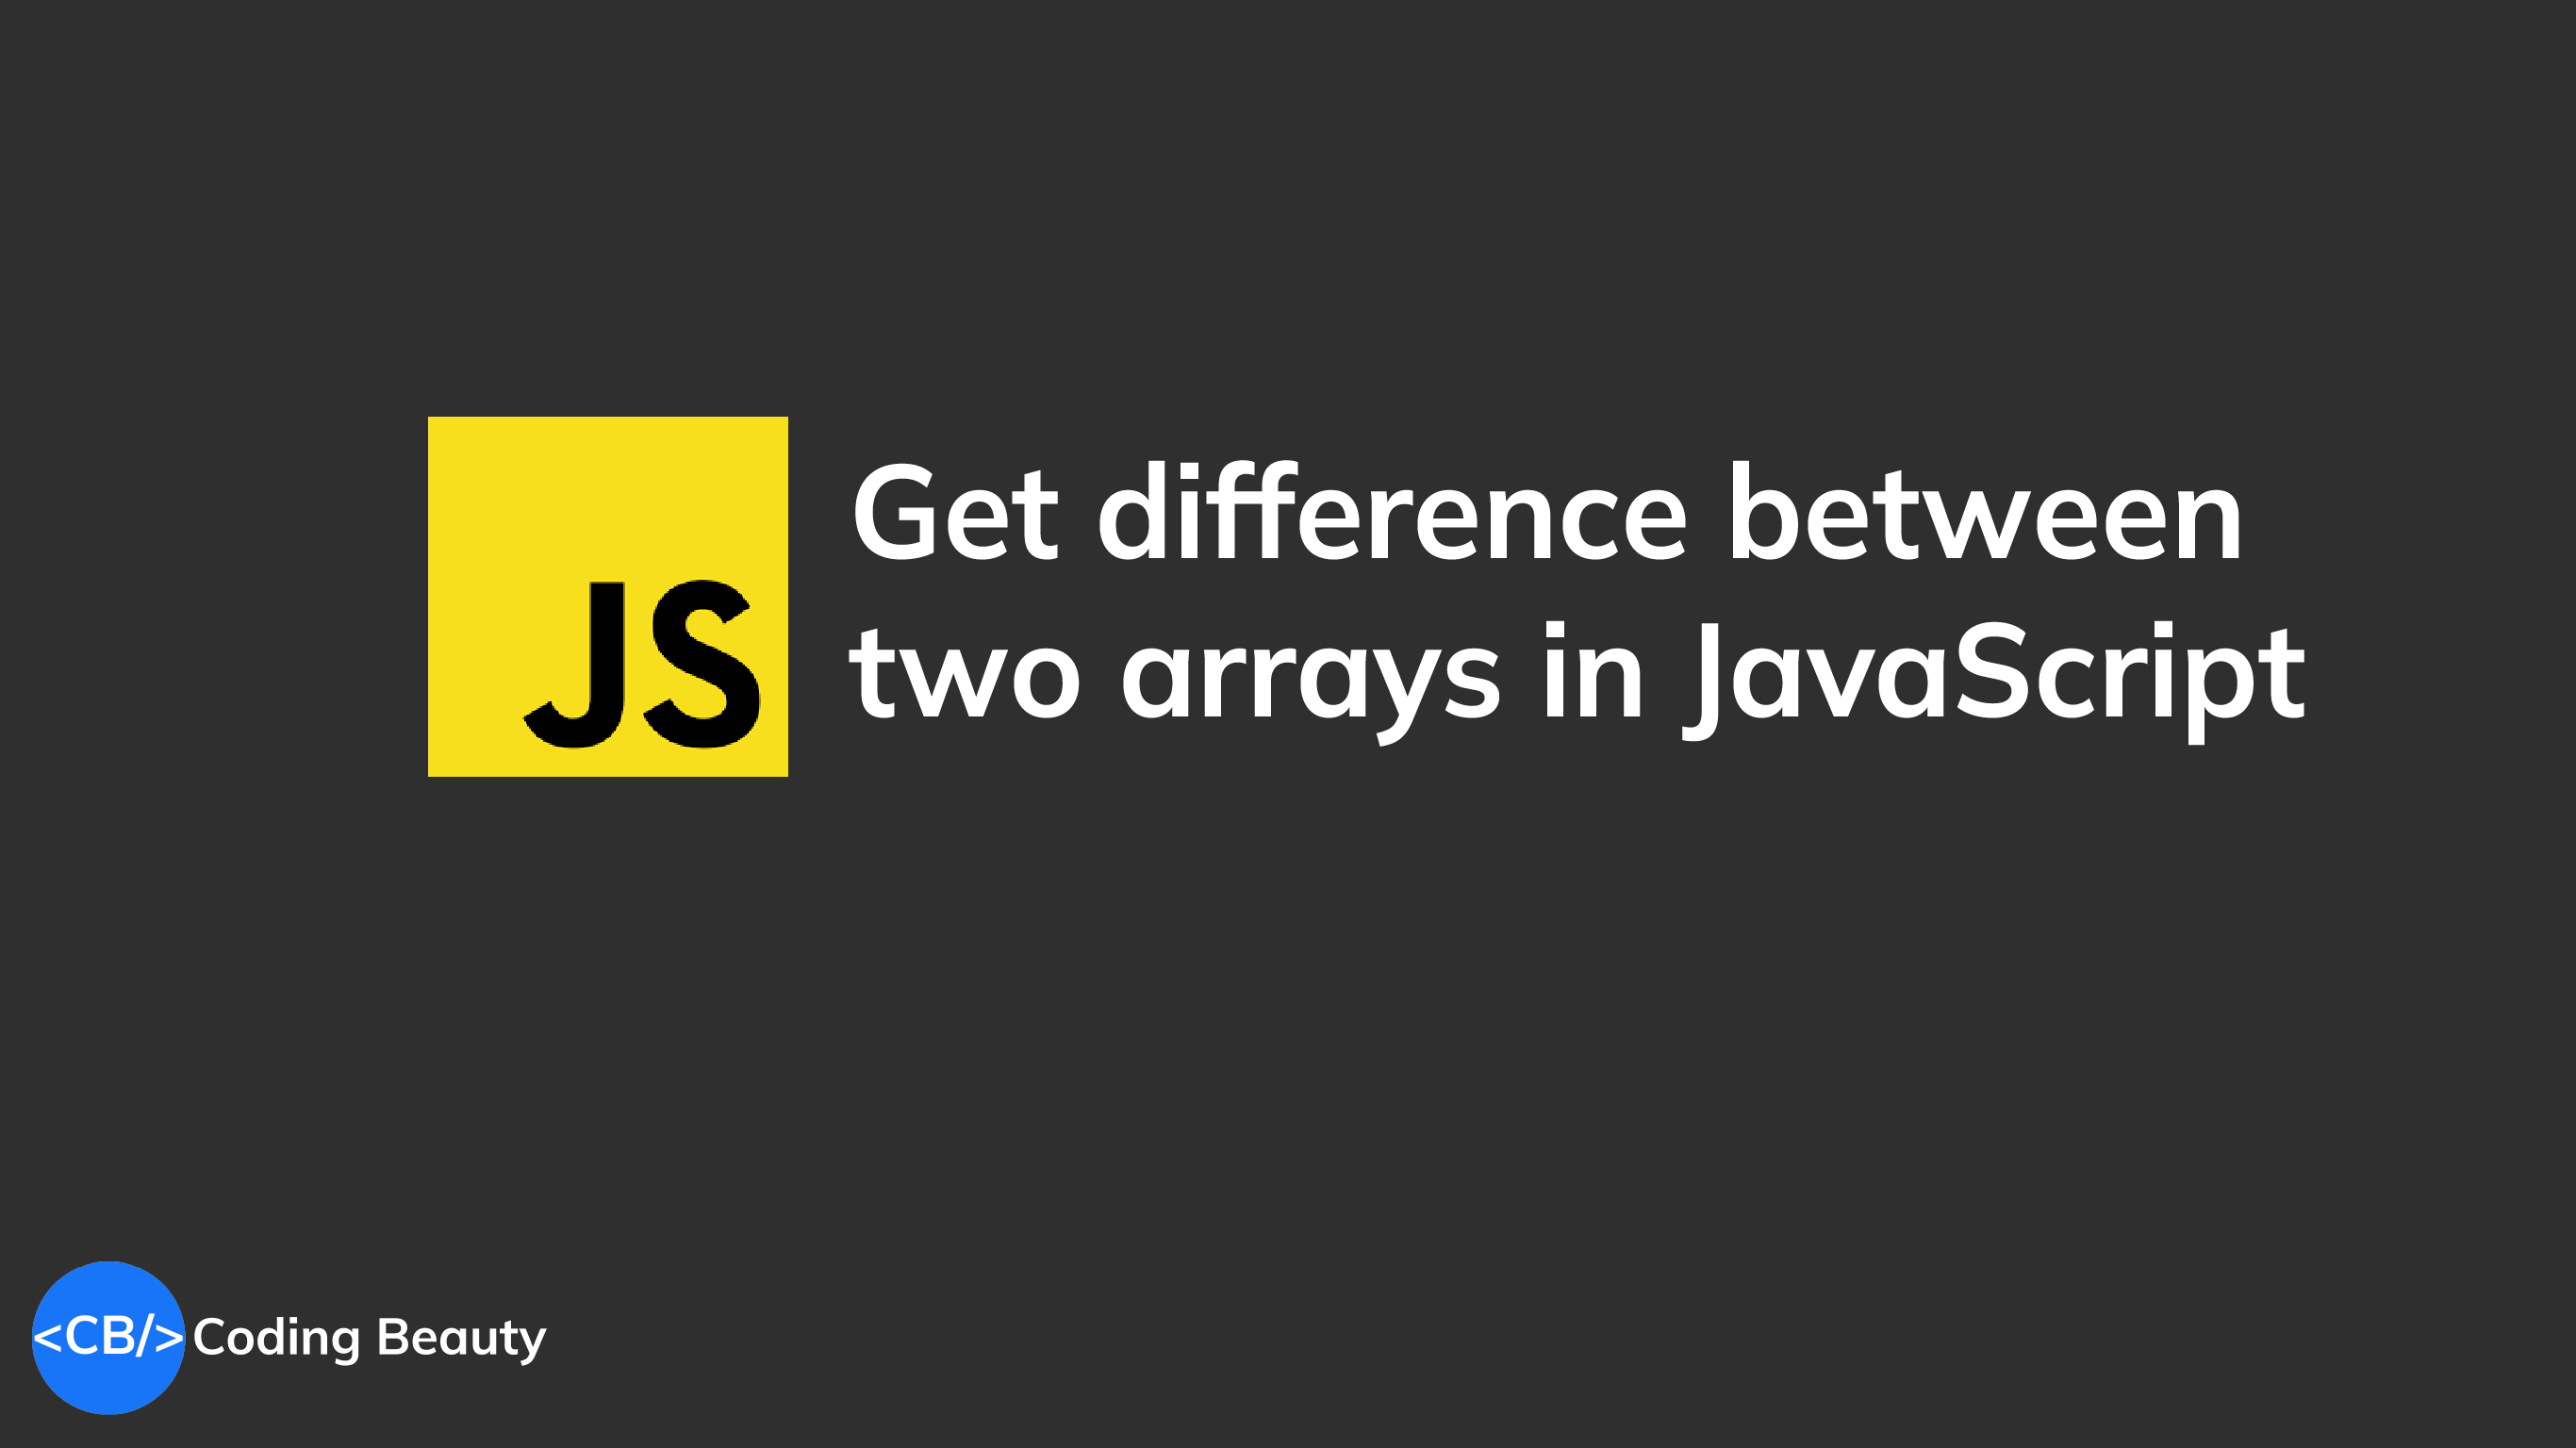 How to get the difference between two arrays in JavaScript